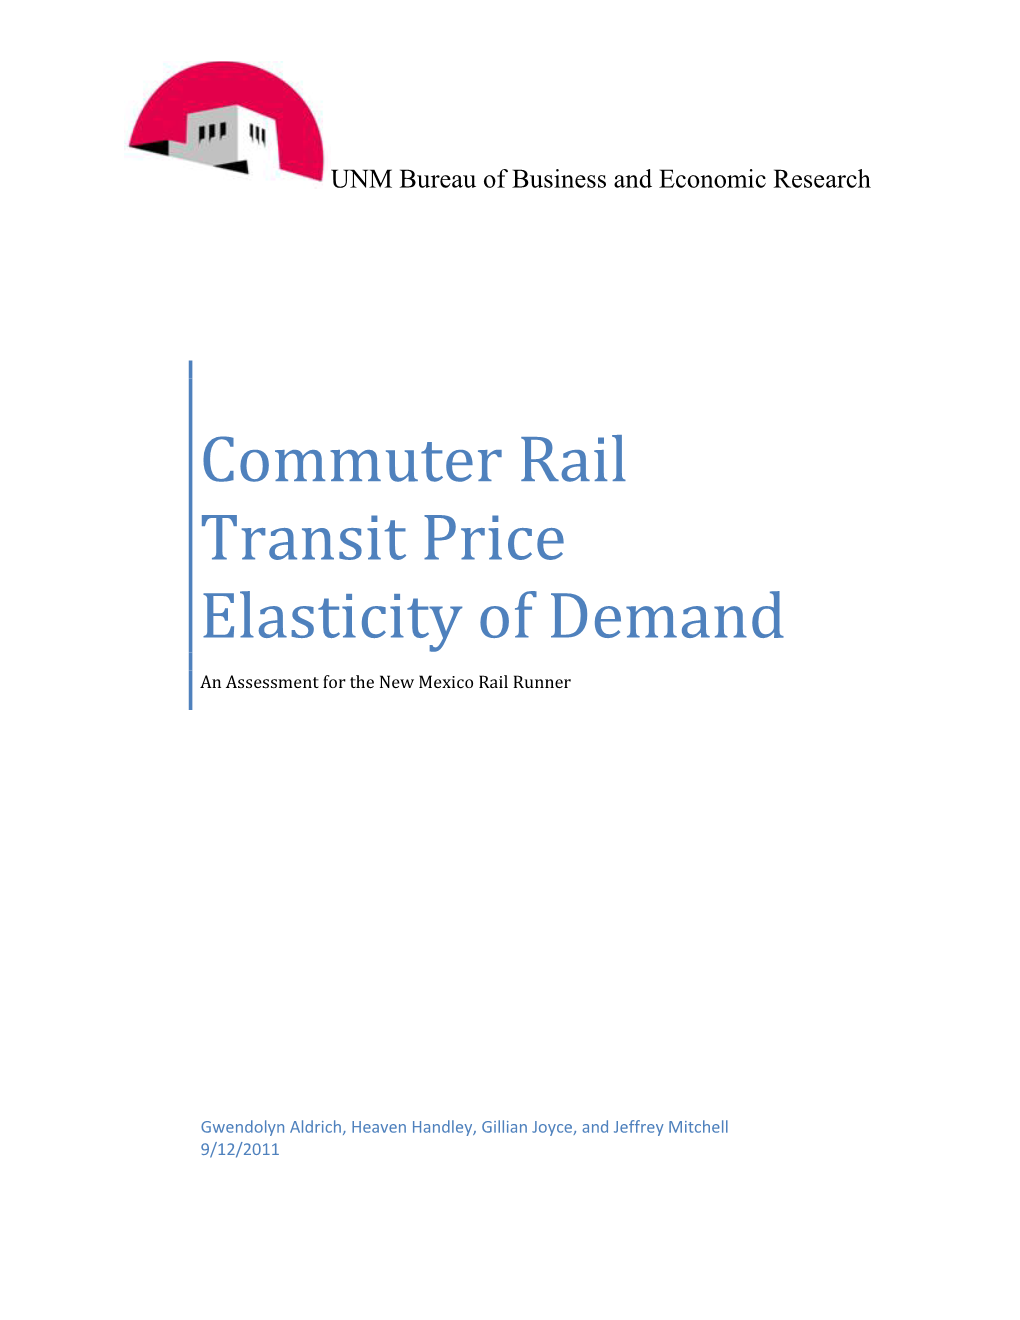 Commuter Rail Transit Price Elasticity of Demand an Assessment for The